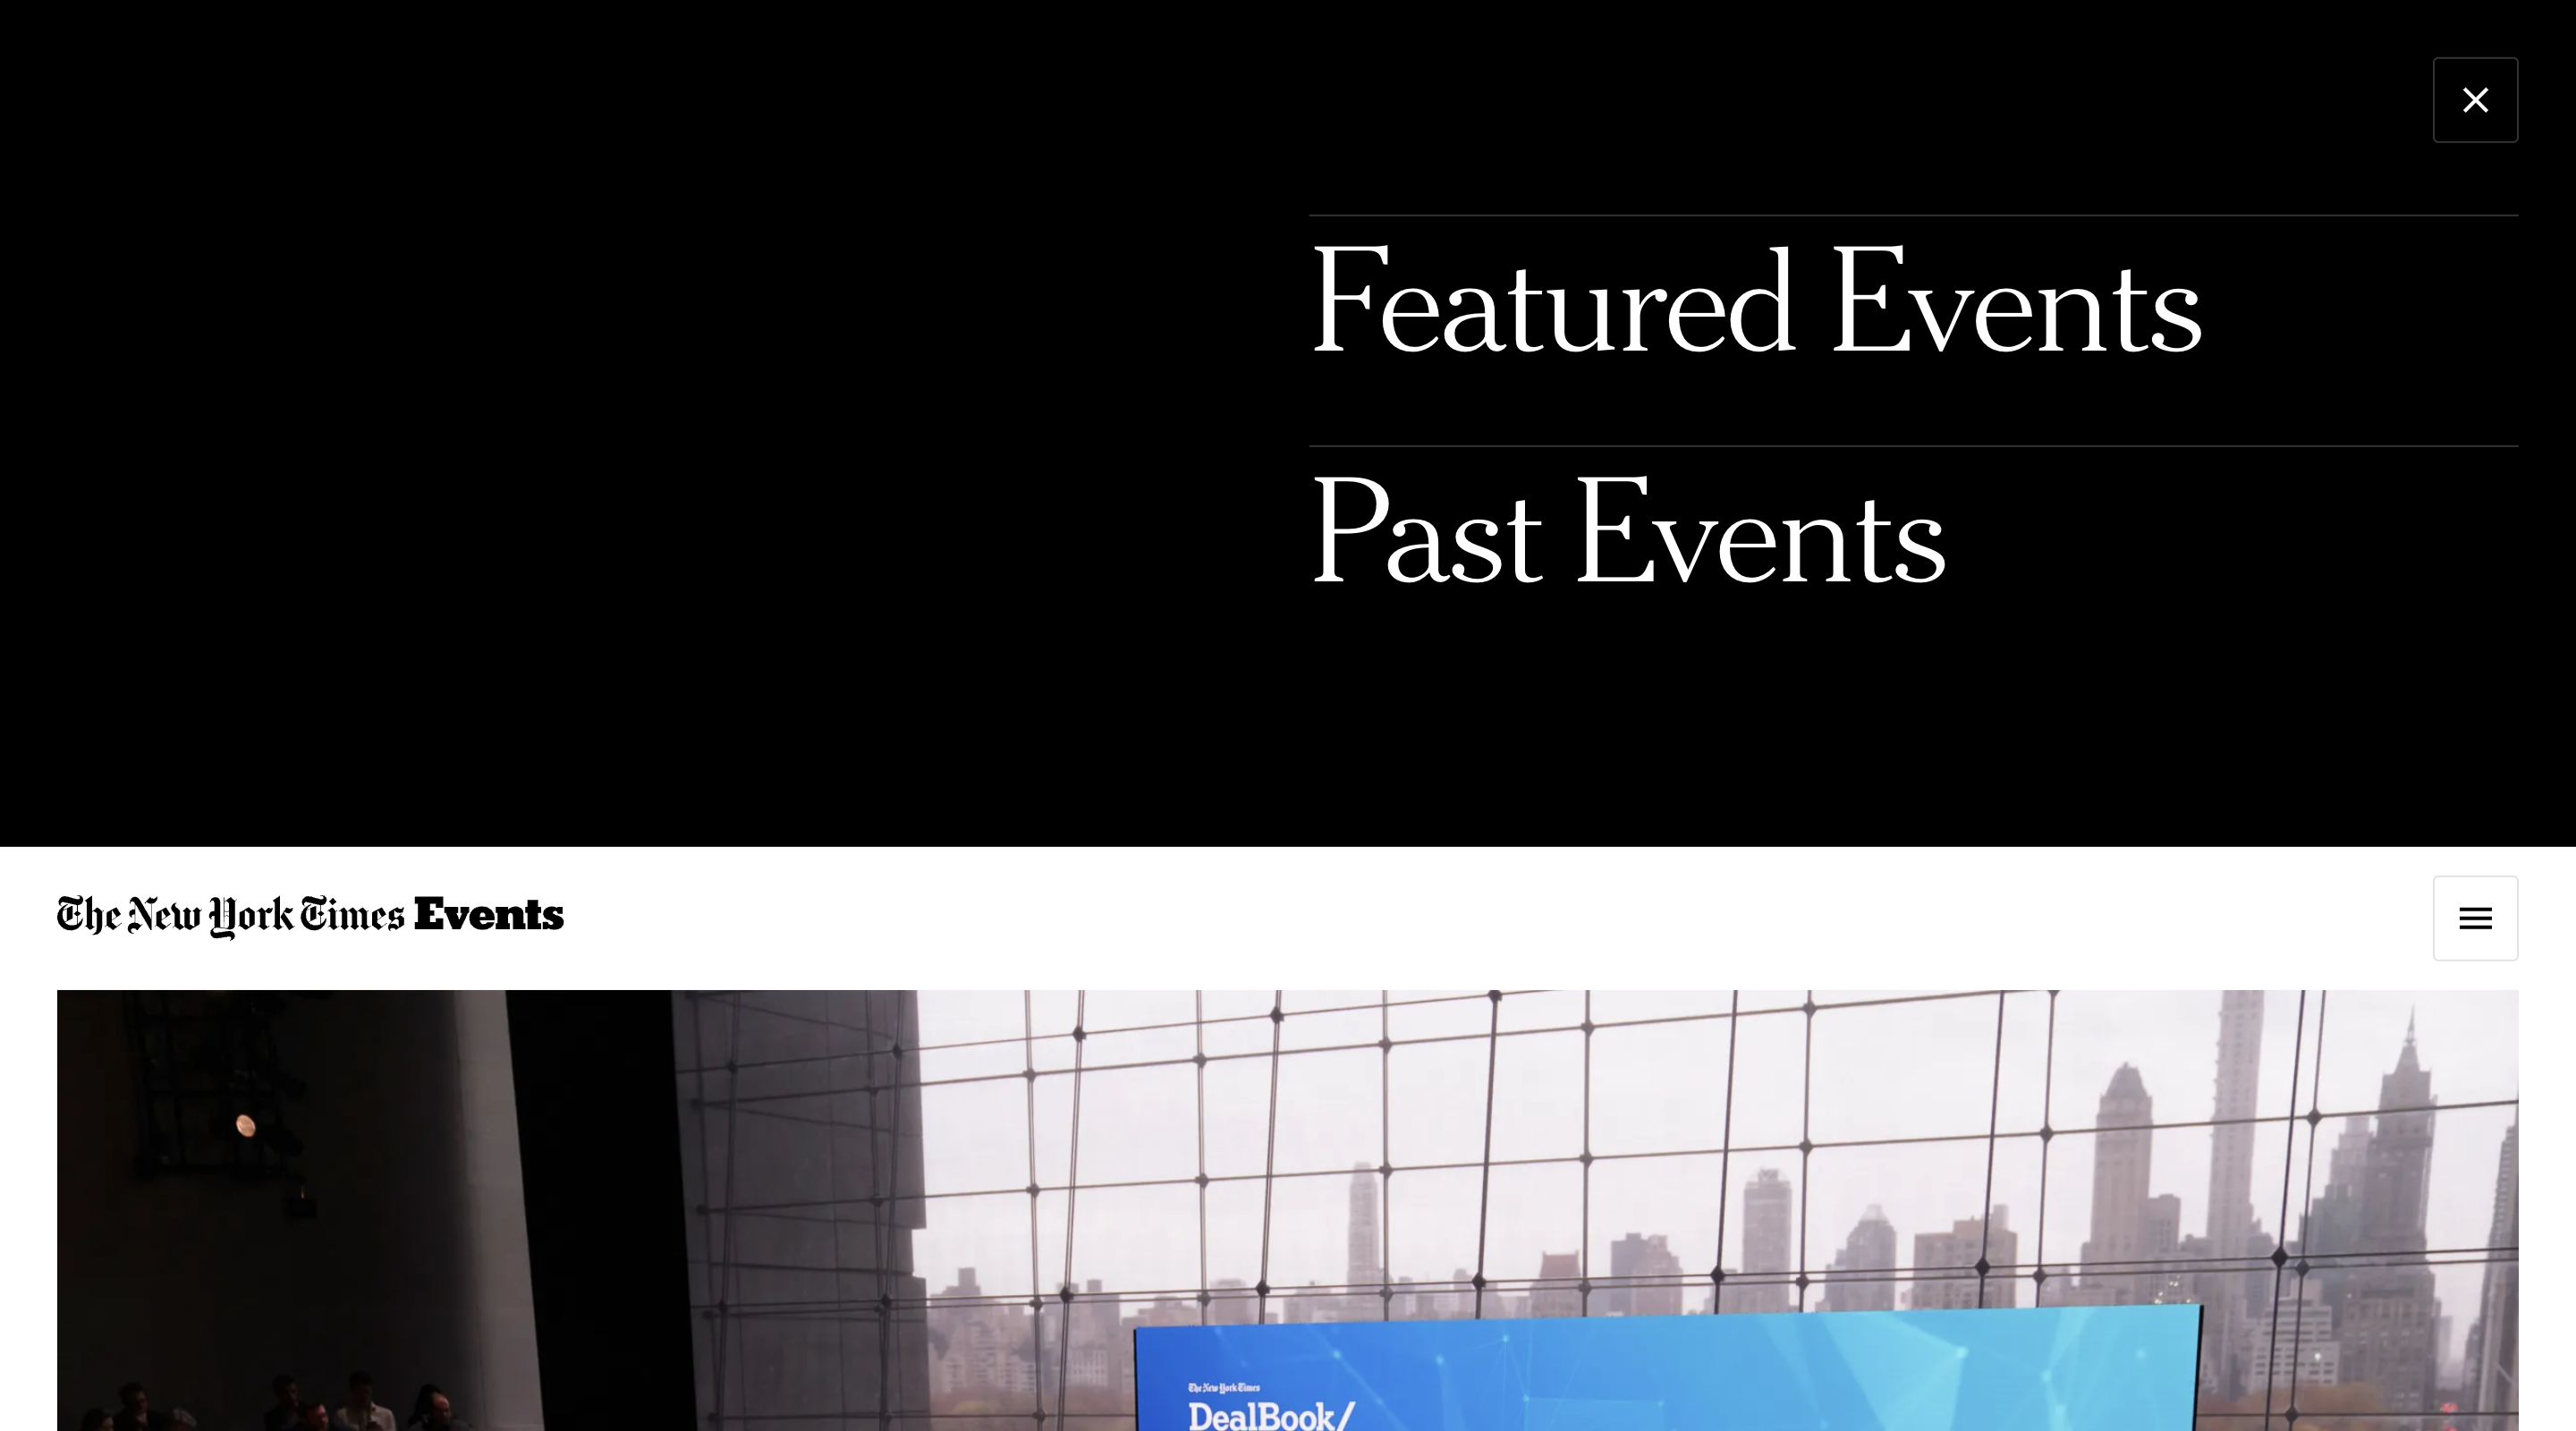 Screenshot of the site menu, which only contains two items: “Featured Events” and “Past Events.” The menu background is black, and the font is a large, white serif font.